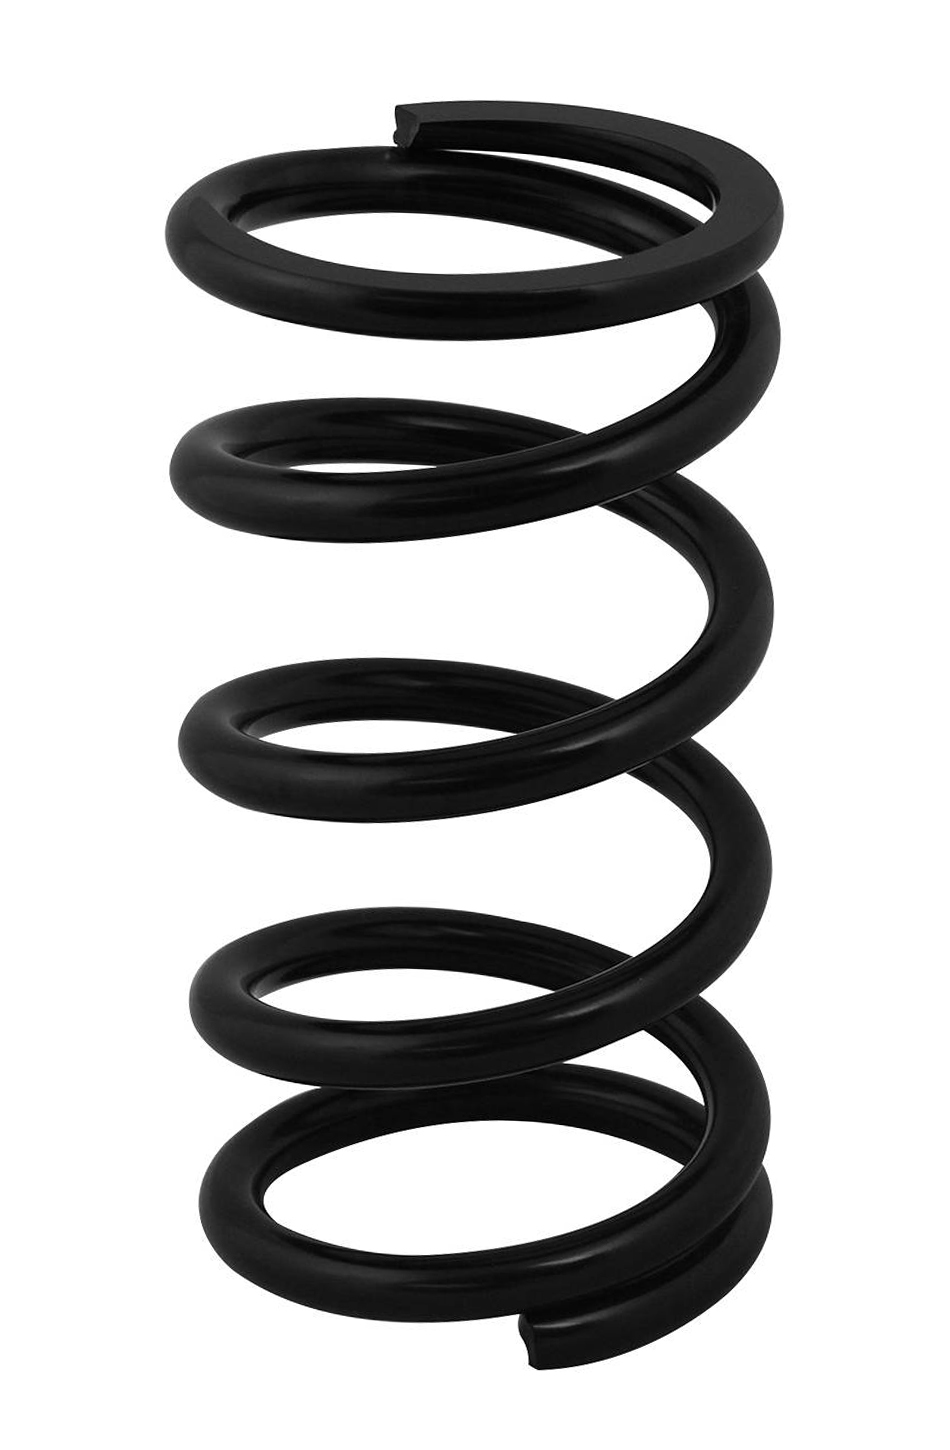 QA1 7HT550B Coil Spring, High Travel, Coil-Over, 2.500 in ID, 7.000 in Length, 550 lb/in Spring Rate, Steel, Black Powder Coat, Each